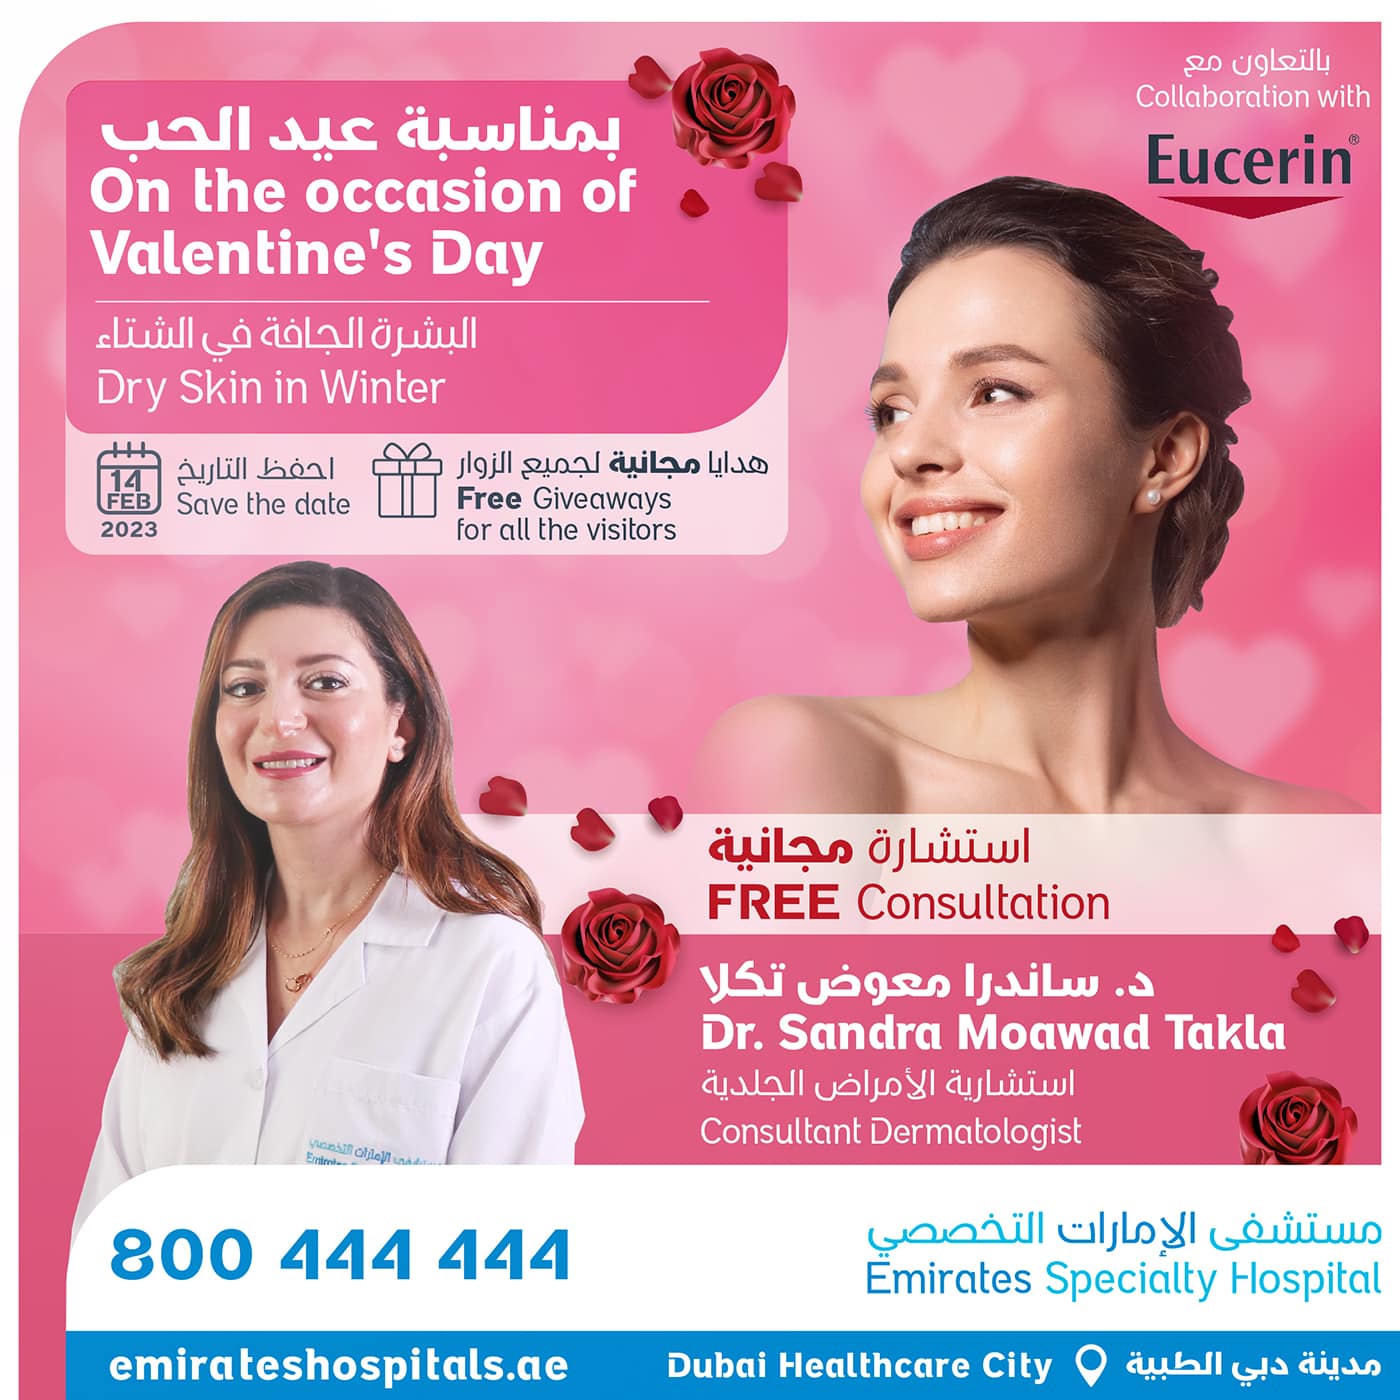 On the occasion of Valentine's Day - Emirates Specialty Hospital DHCC